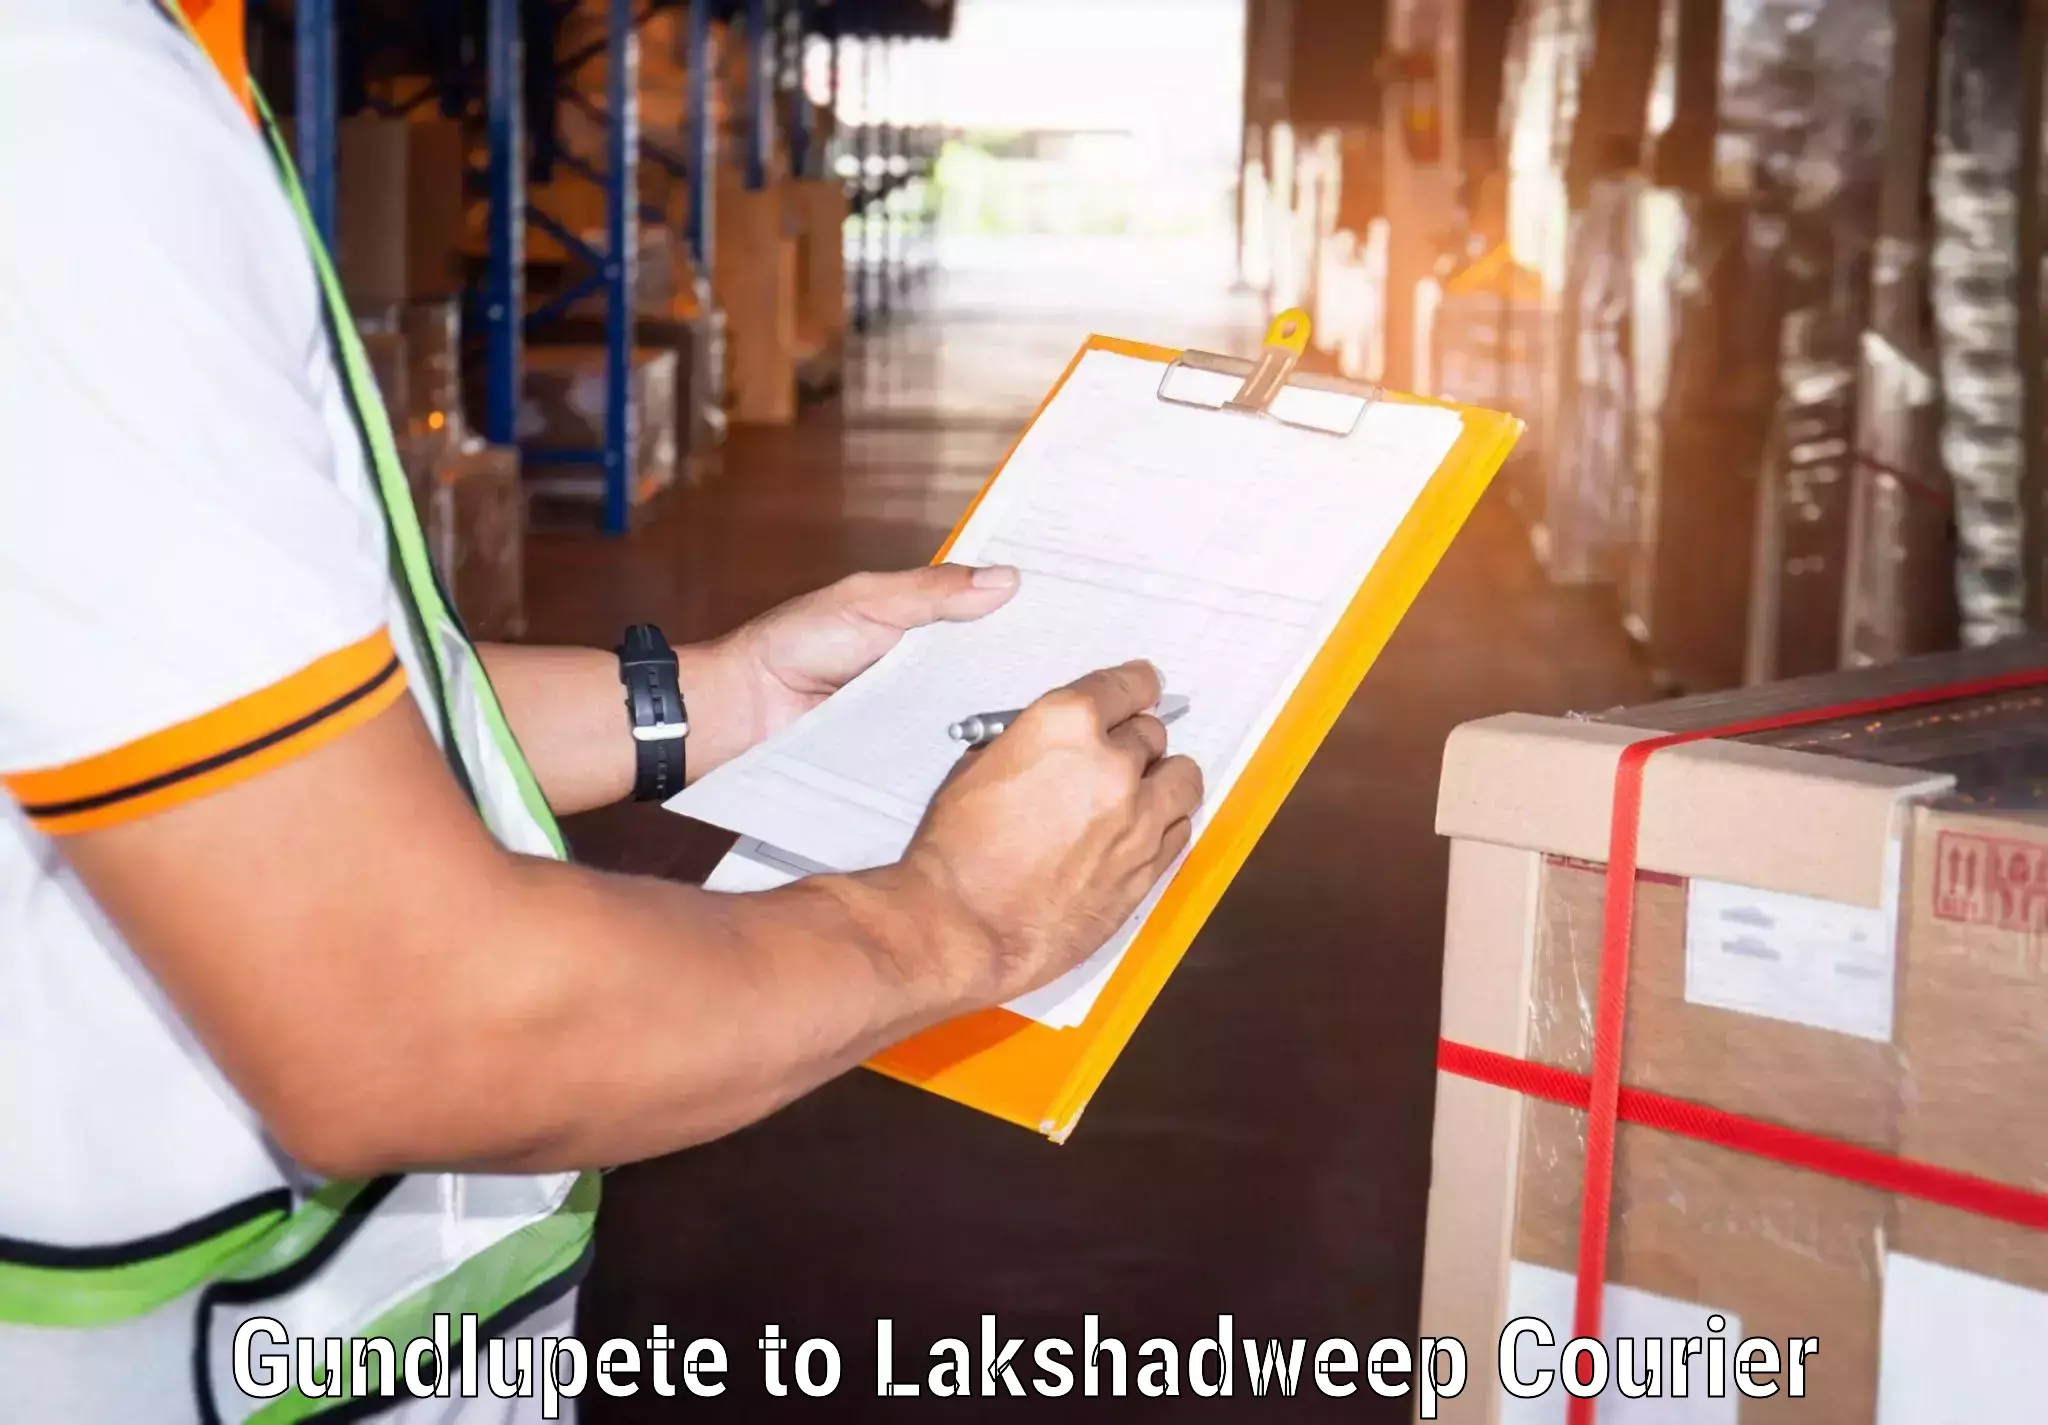 Courier app Gundlupete to Lakshadweep